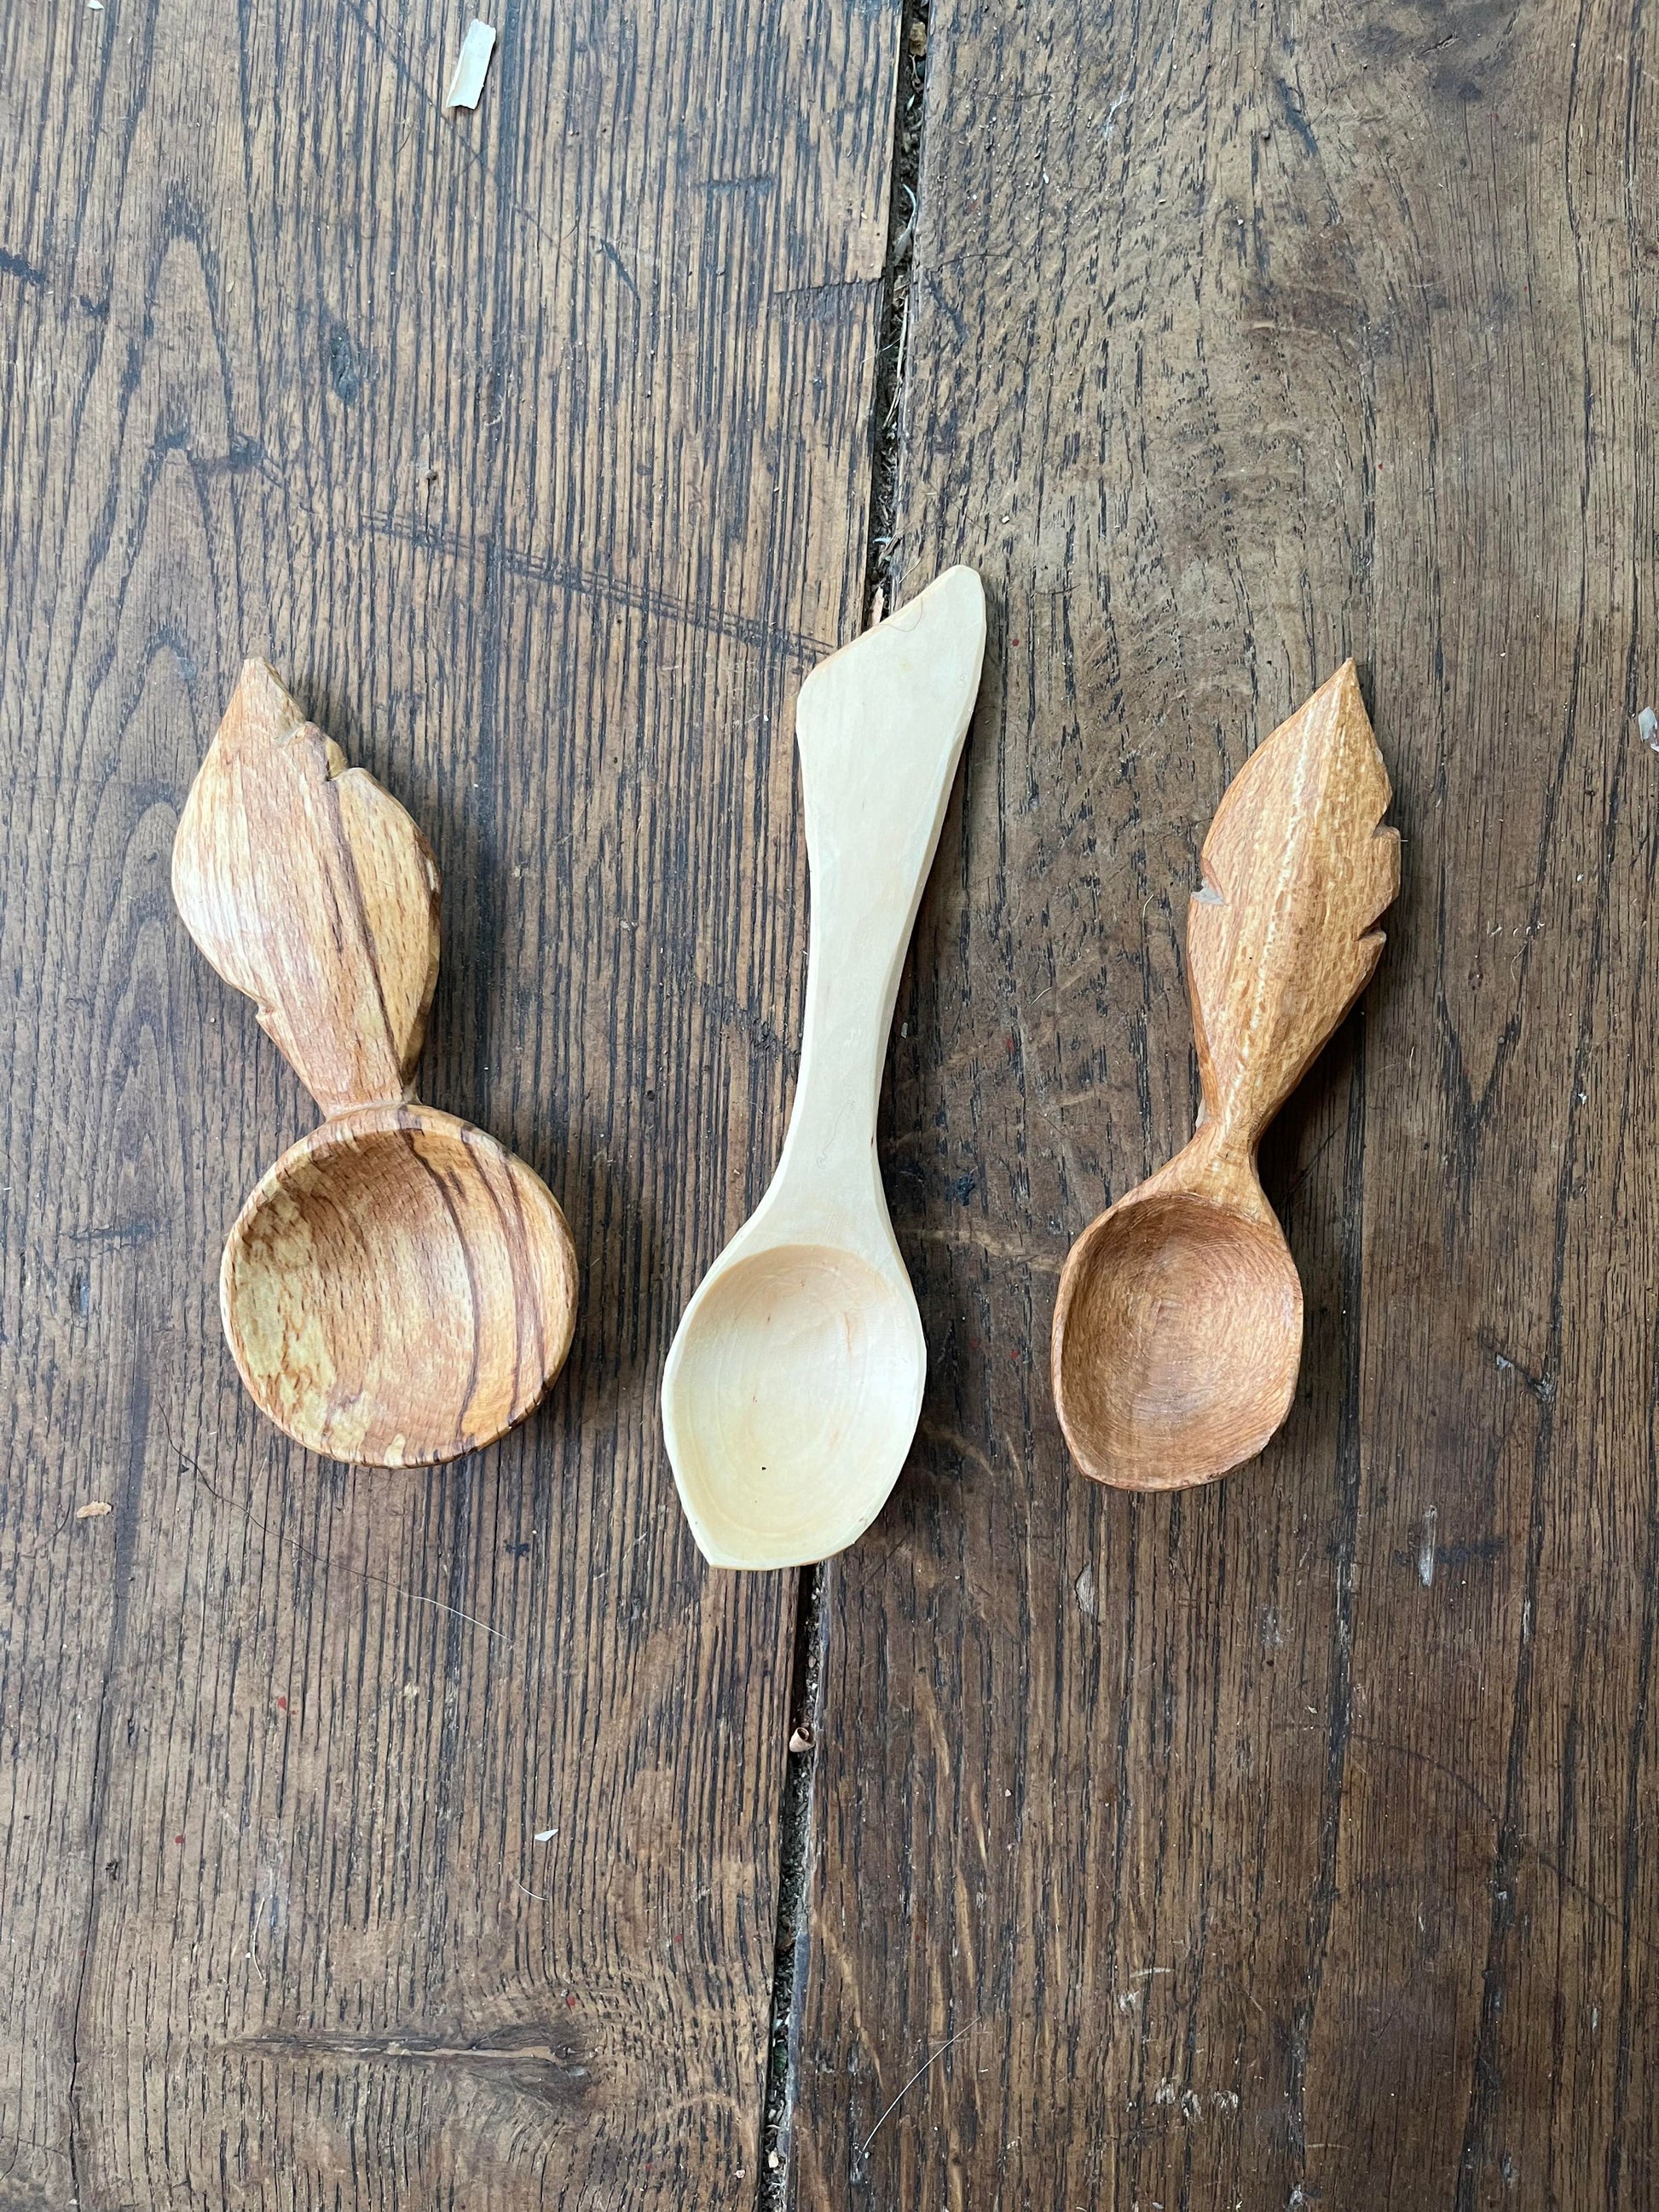 14+ Wooden Spoon Carving Kit